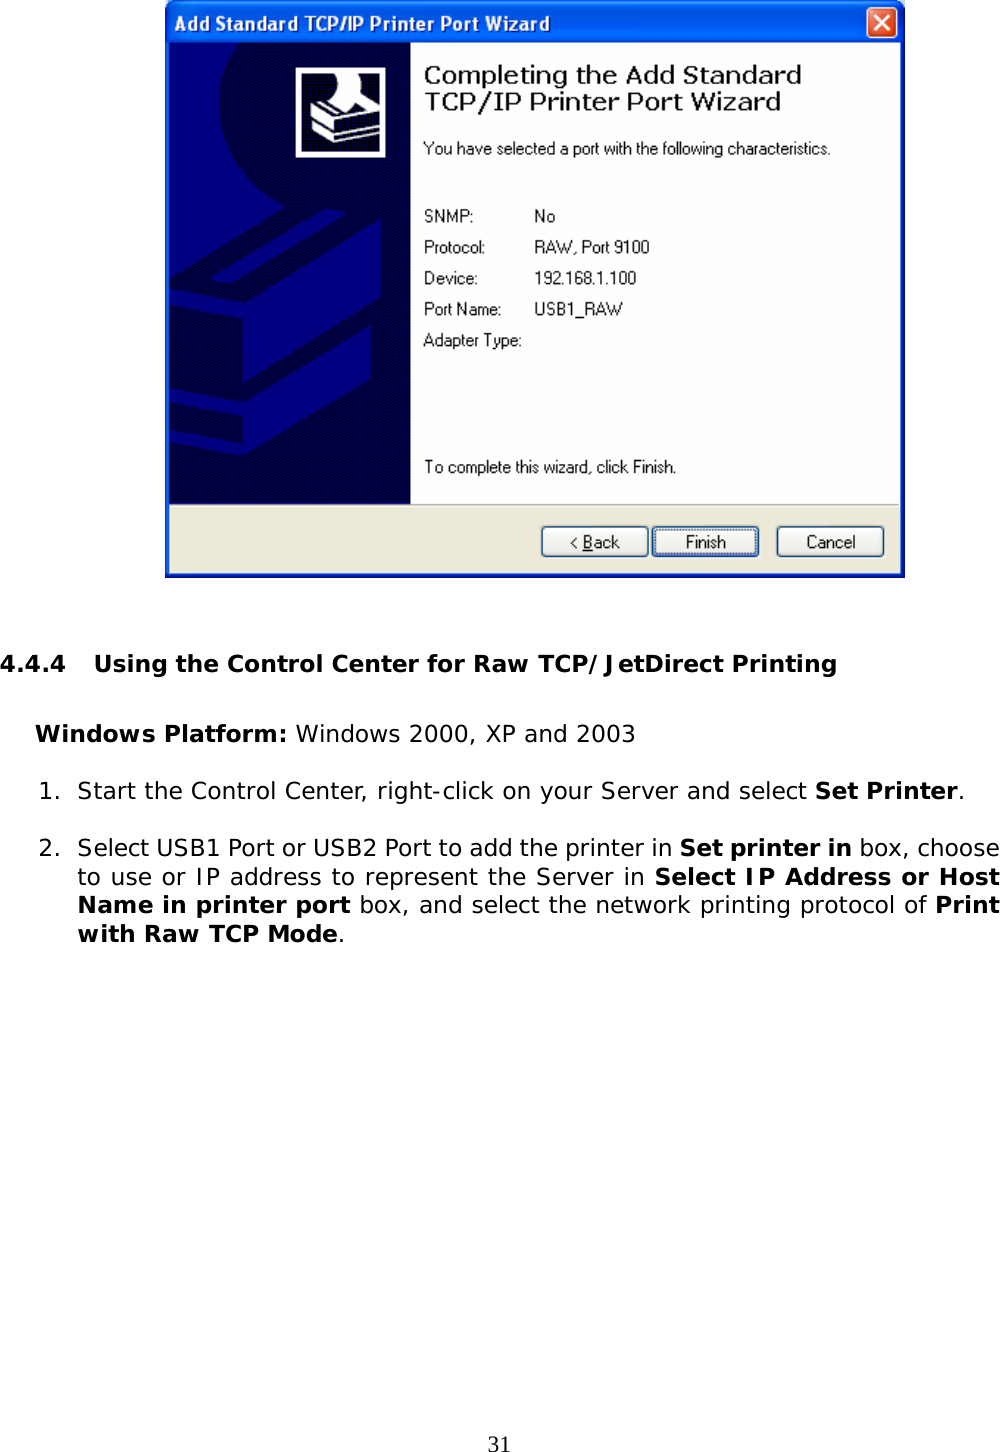     31   4.4.4 Using the Control Center for Raw TCP/JetDirect Printing  Windows Platform: Windows 2000, XP and 2003 1. Start the Control Center, right-click on your Server and select Set Printer.  2. Select USB1 Port or USB2 Port to add the printer in Set printer in box, choose to use or IP address to represent the Server in Select IP Address or Host Name in printer port box, and select the network printing protocol of Print with Raw TCP Mode.  